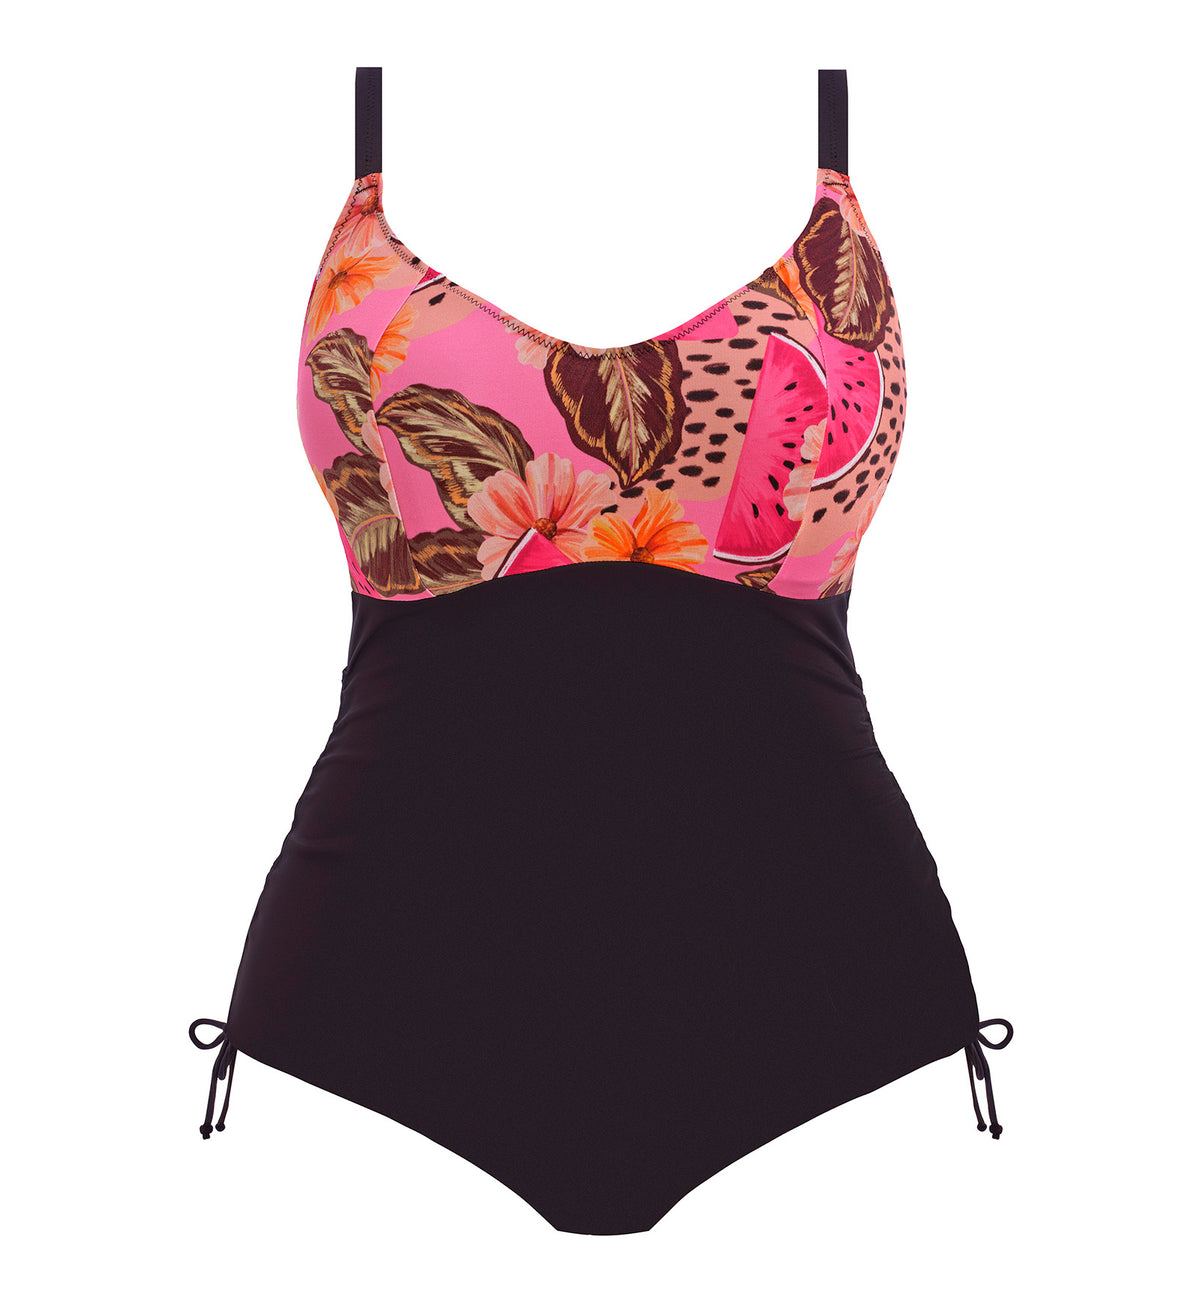 Elomi Cabana Nights Scoop Non Wire One Piece Swimsuit (ES801643),34 G/GG,Multi - Multi,34 G/GG